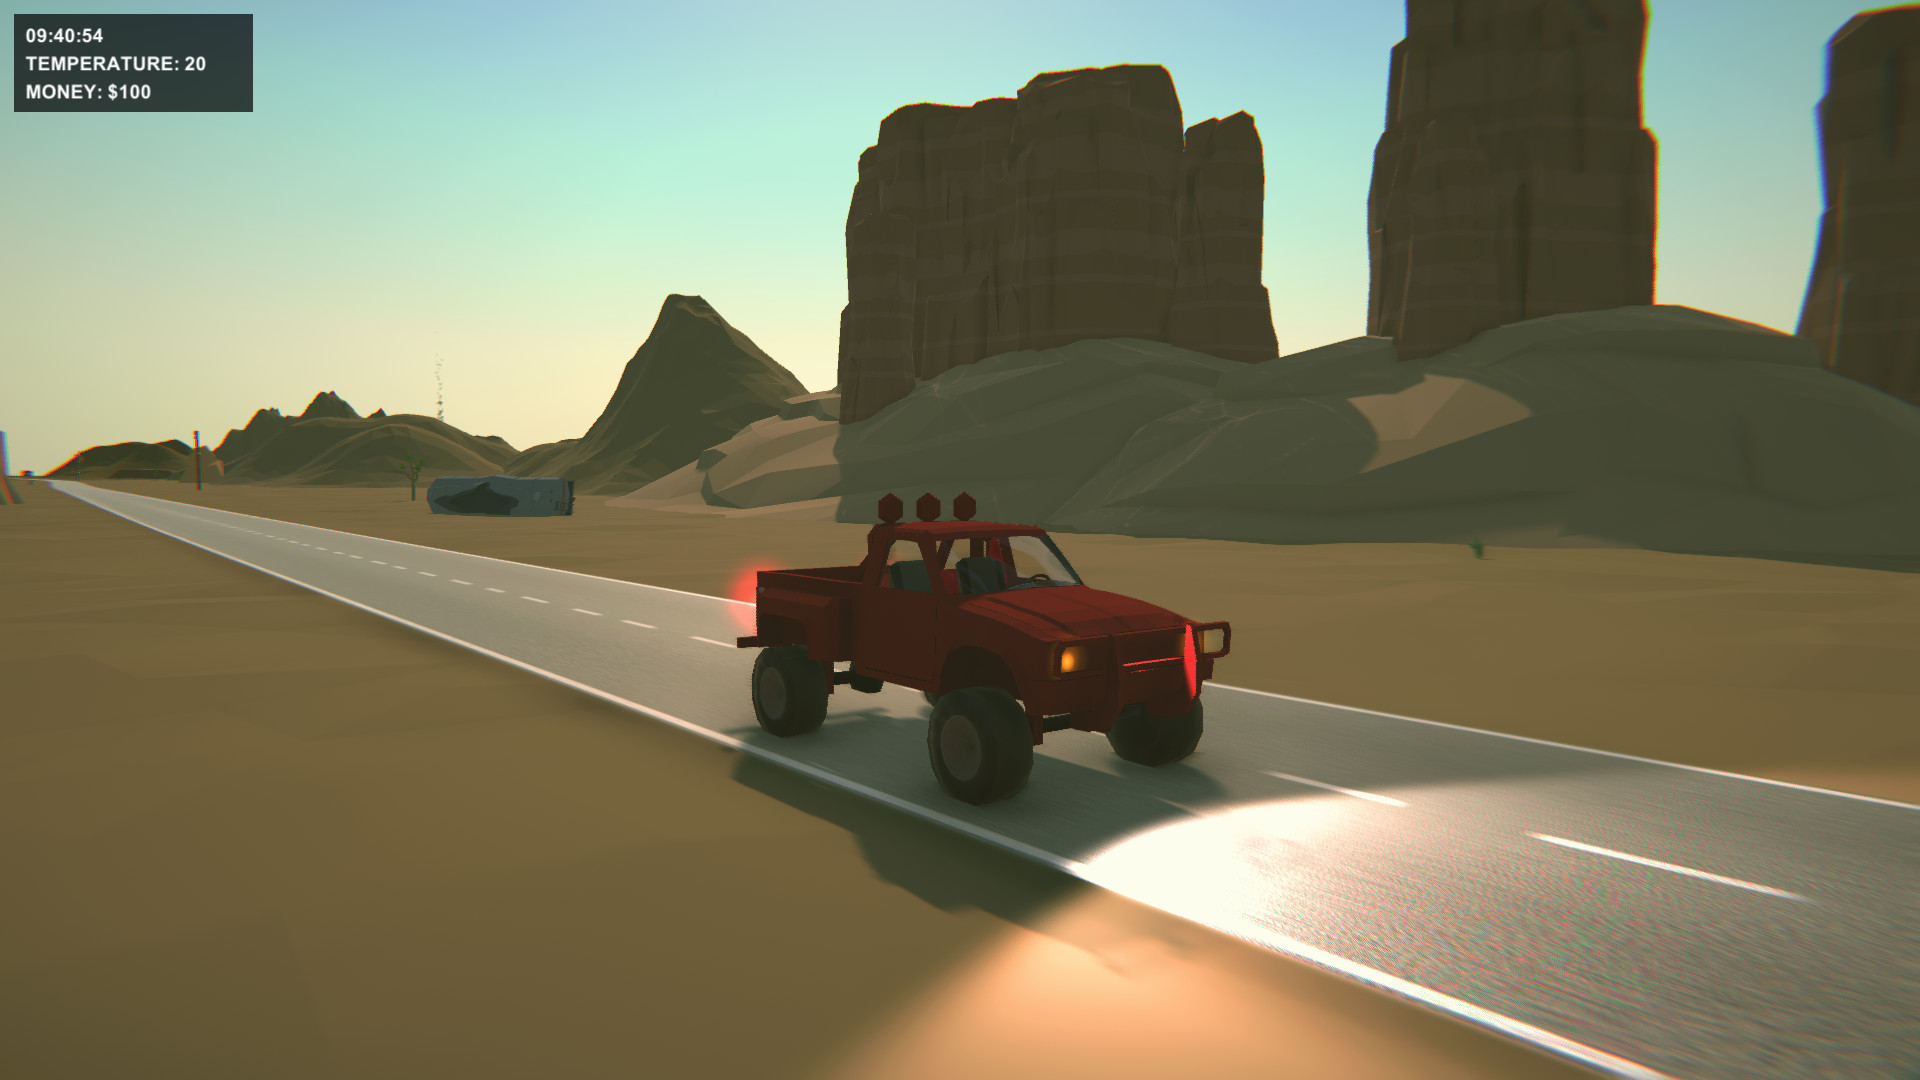 Long Car Journey - A road trip game Free Download